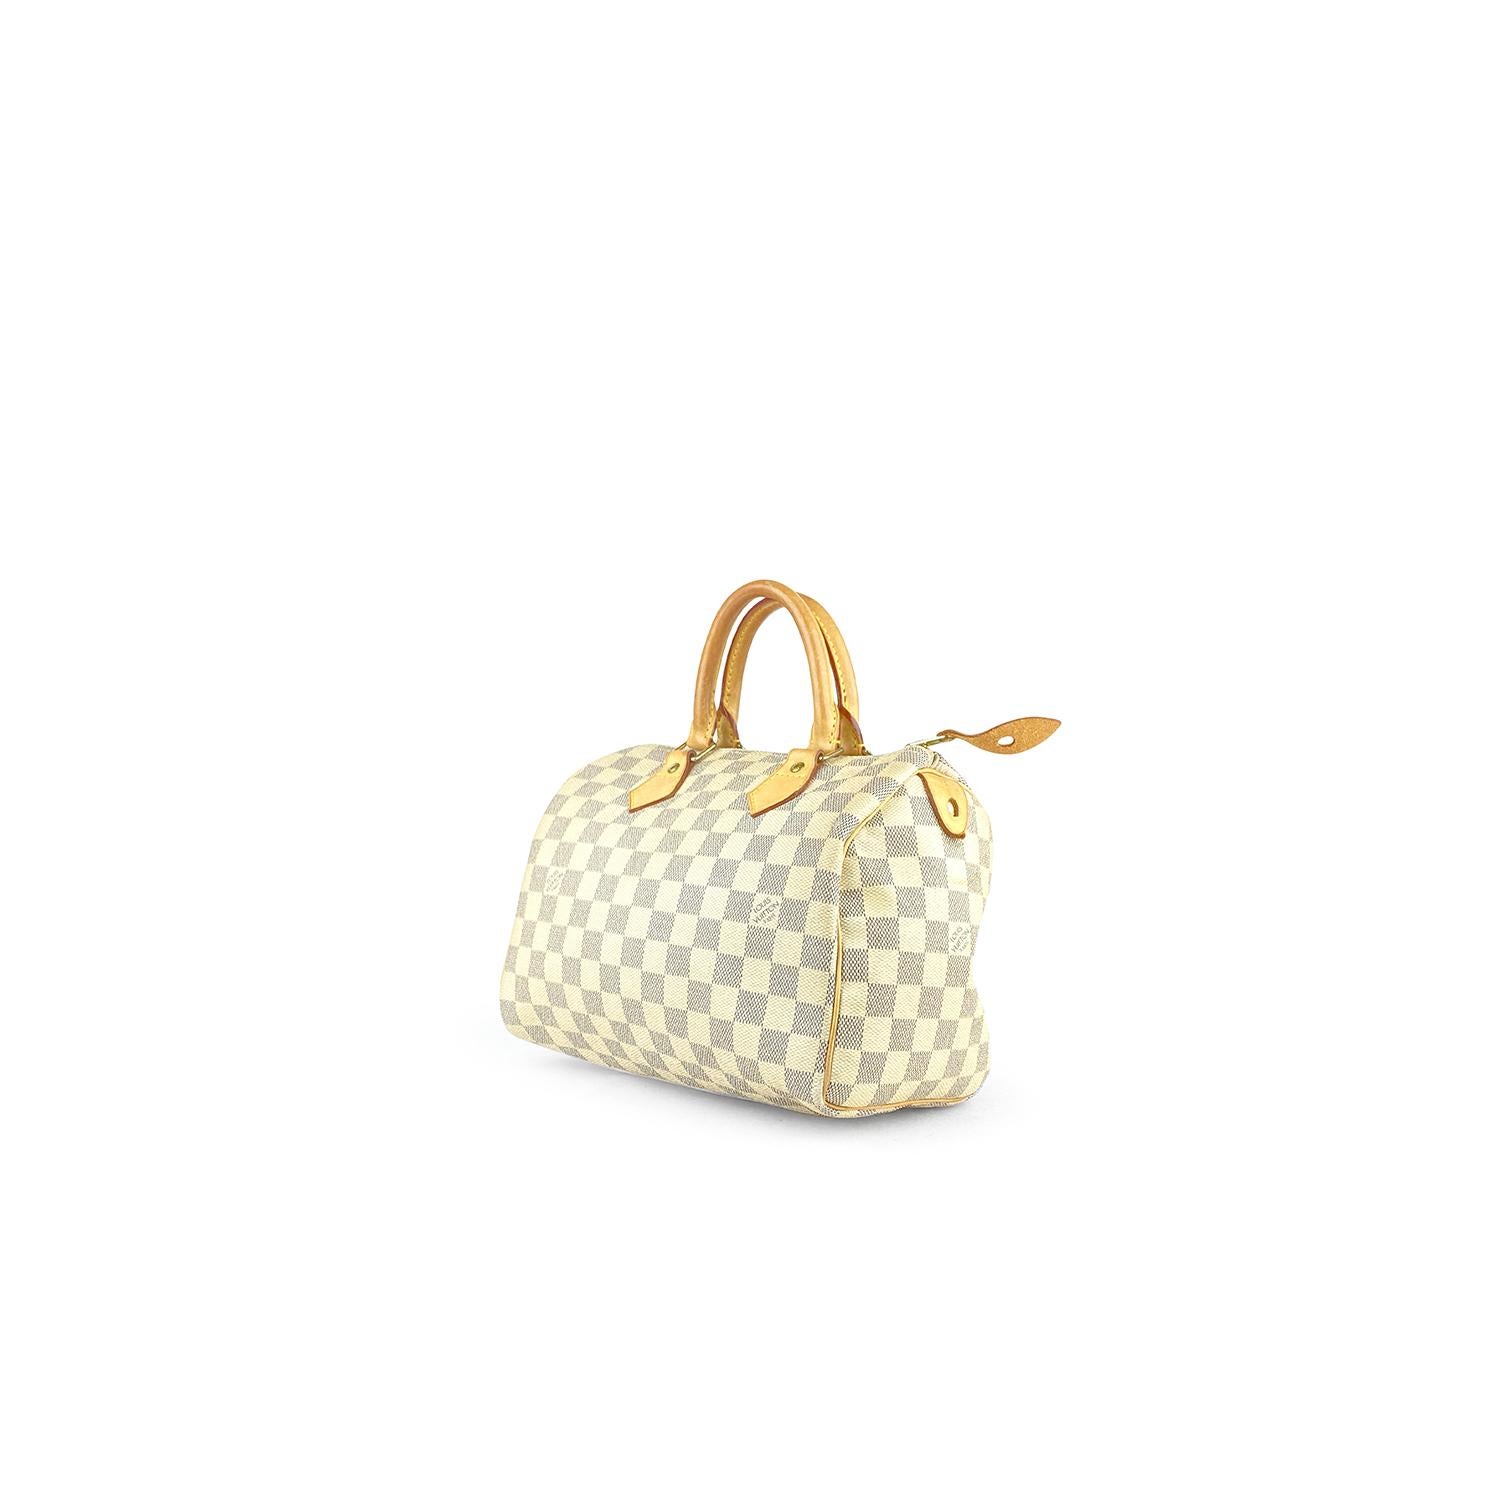 Creme and navy Damier Azur coated canvas Louis Vuitton Speedy 25 with 

– Brass hardware
– Dual rolled top handles
– Tan vachetta leather trim
– Beige canvas lining, single slit pocket at interior wall and zip closure at top

Overall Preloved